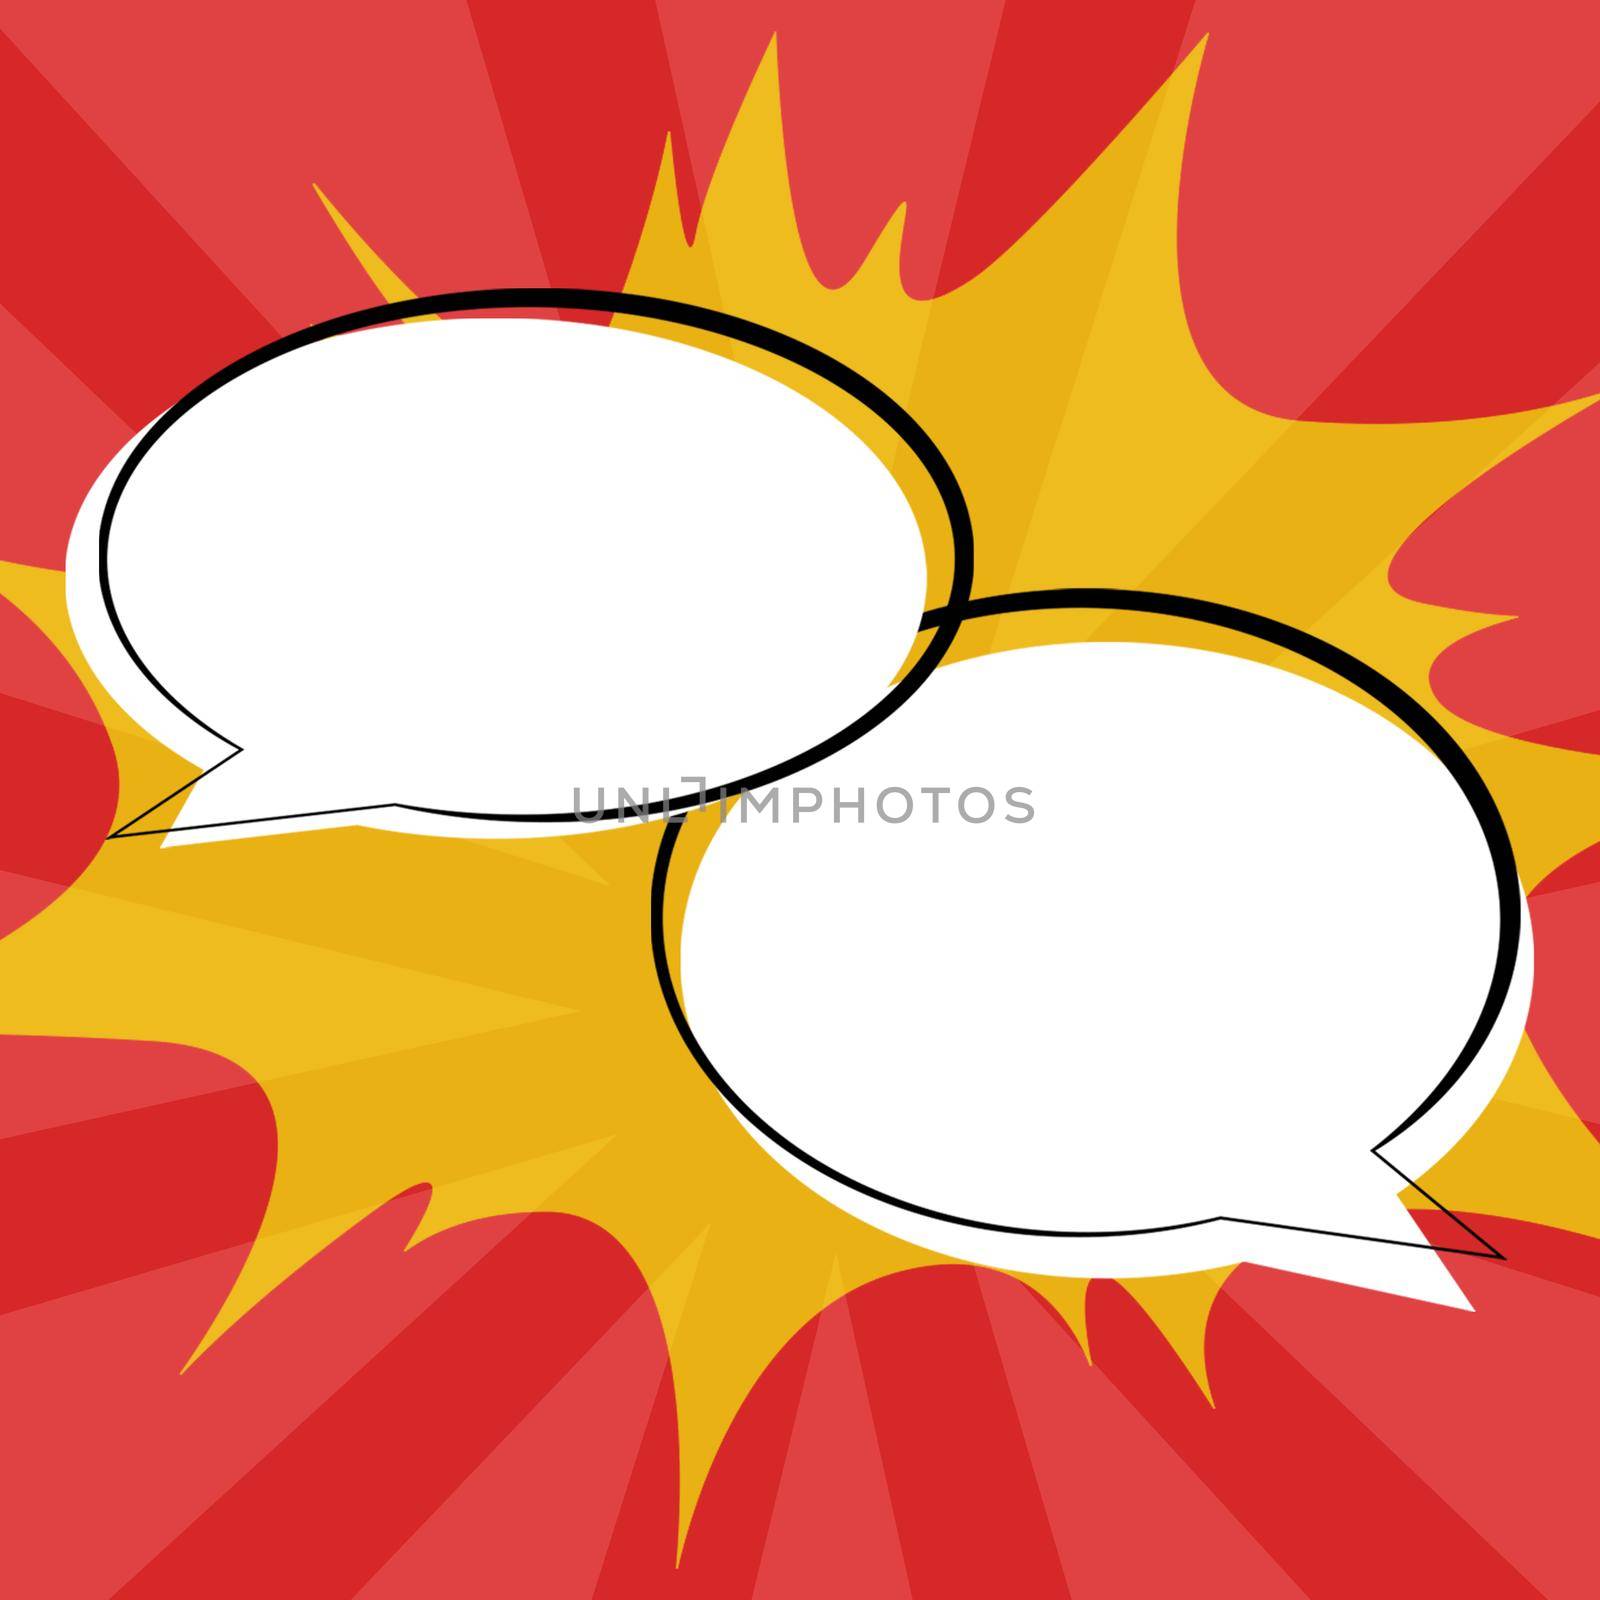 Pair Of Speech Bubbles In Oval Shape Representing Exchanging Of Opinions.